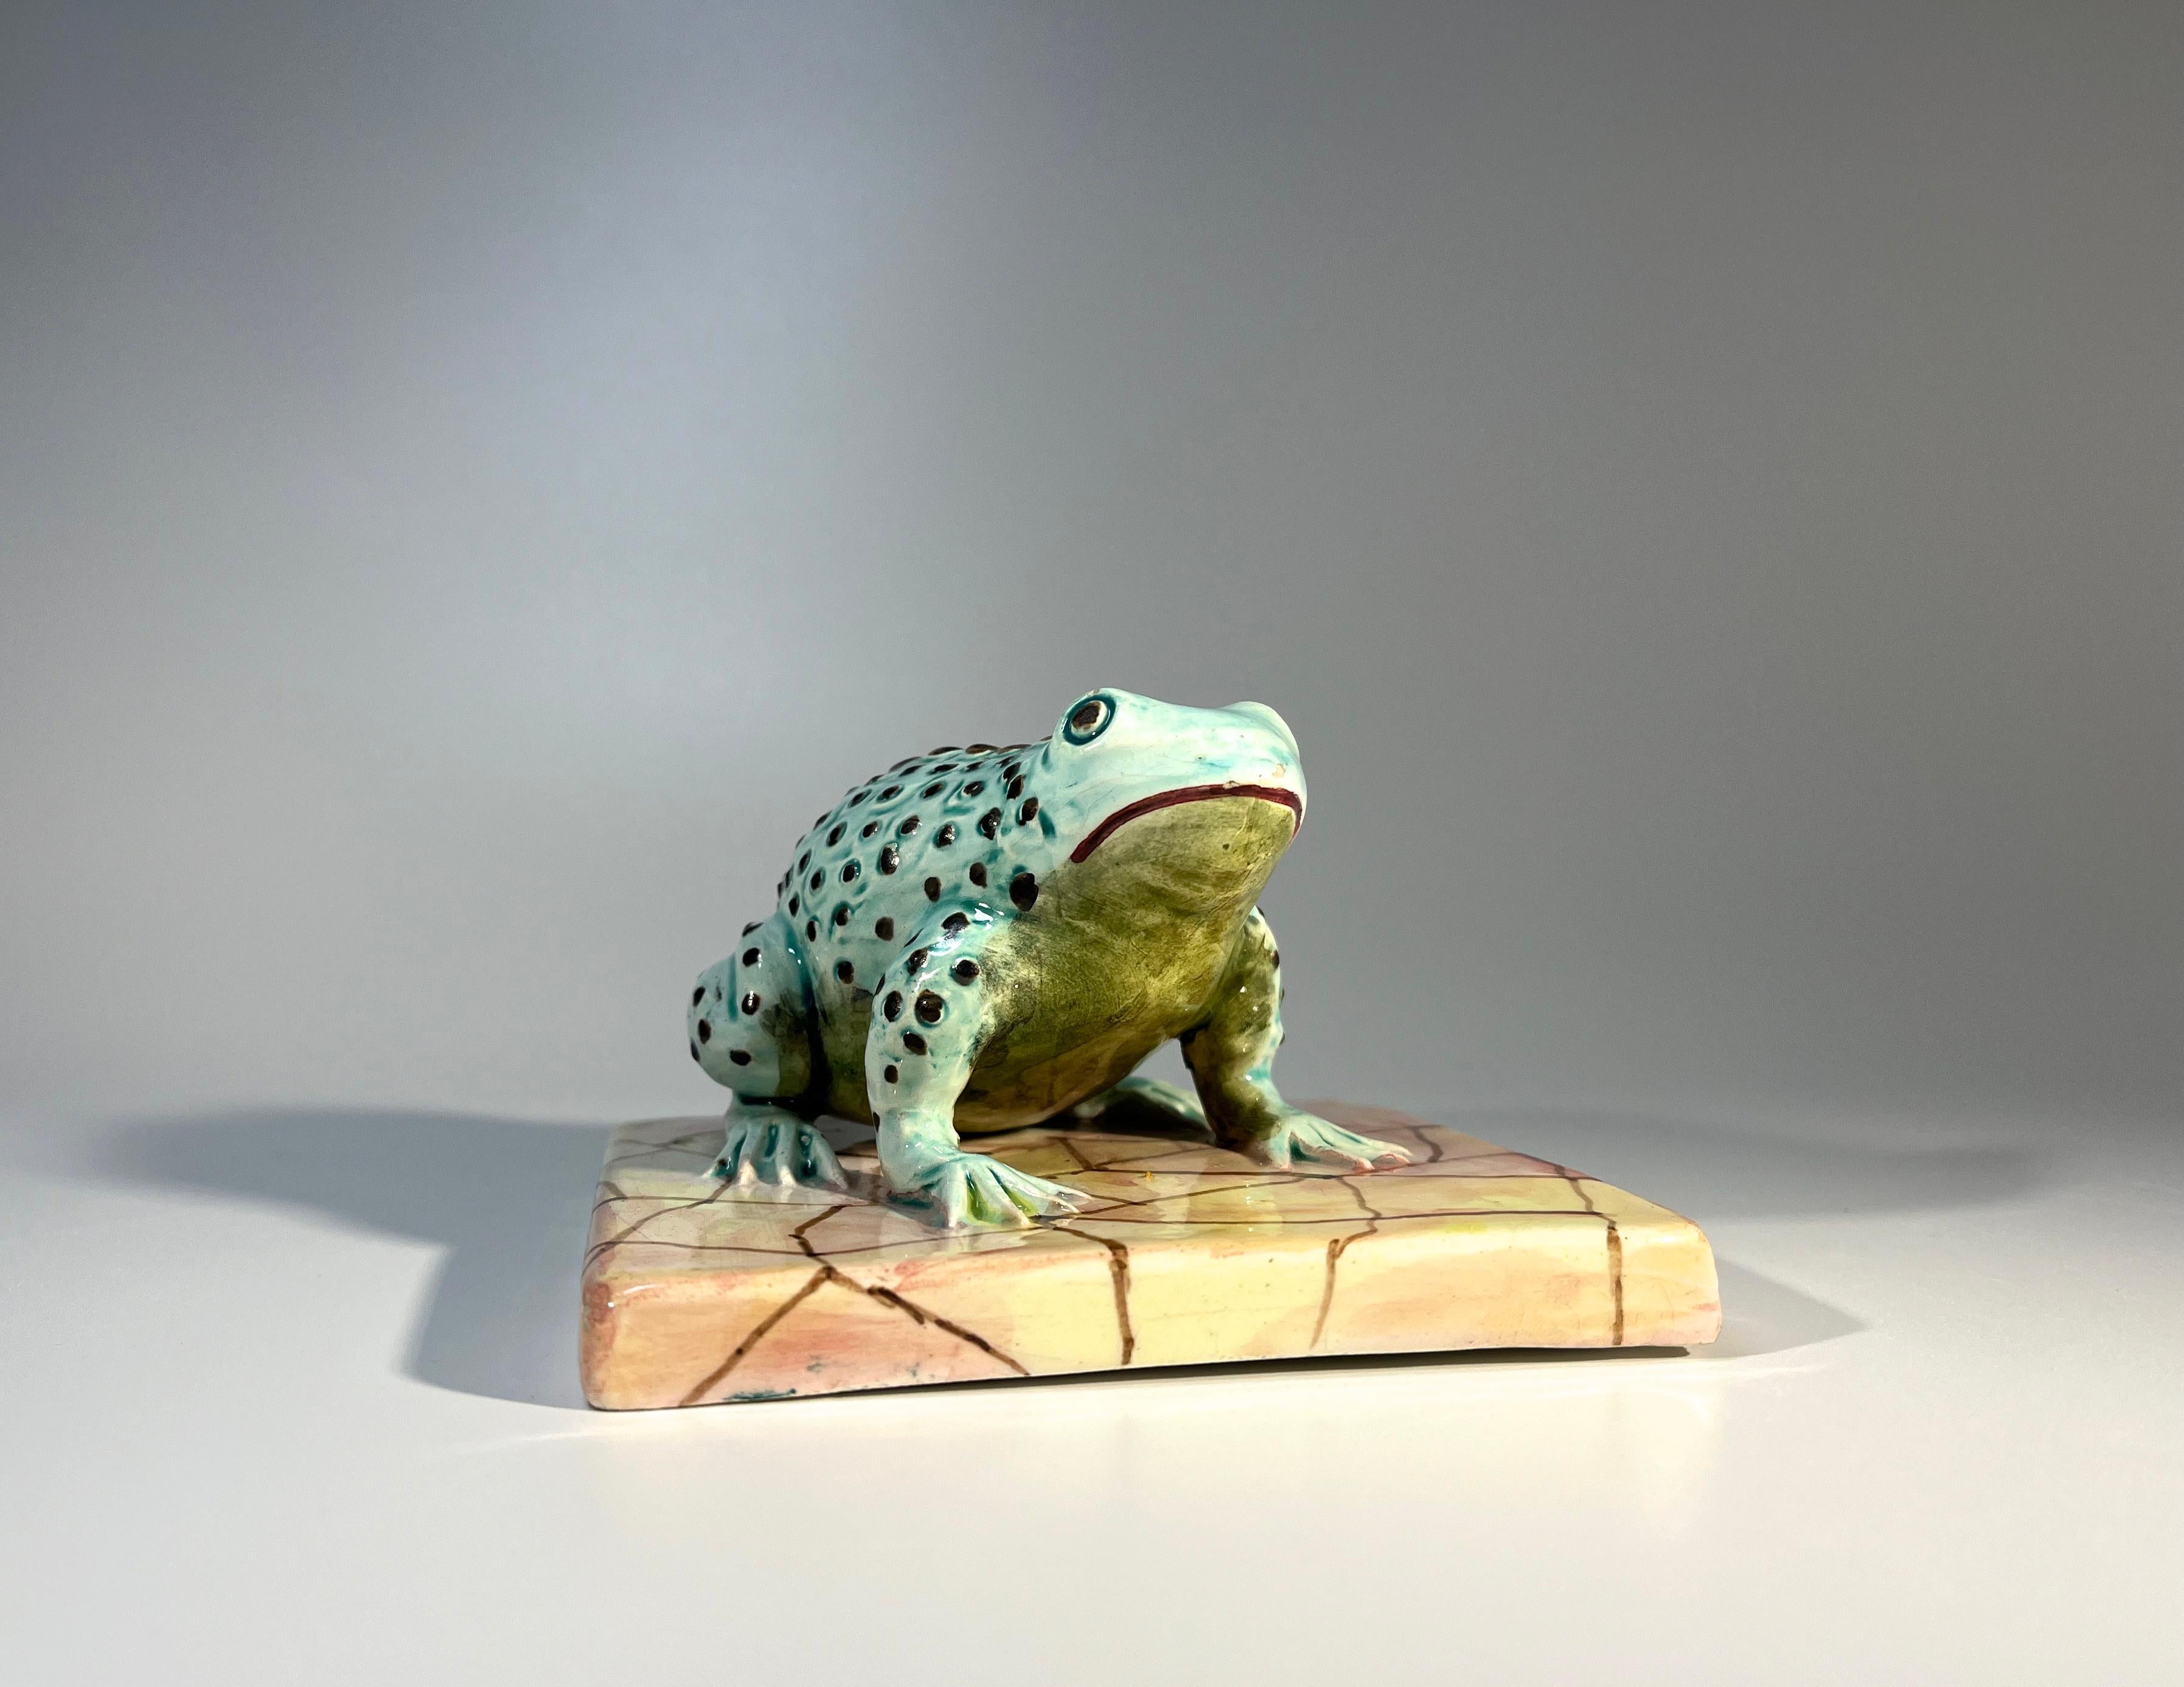 Charming Italian ceramic toad sitting on a tile 
Four inch square tile with a superbly tactile blue toad atop
Understood to have been privately commissioned 
Circa 1960's
Signed Italy
Height 4 inch, Width 4 inch, Depth 2.5 inch
In excellent